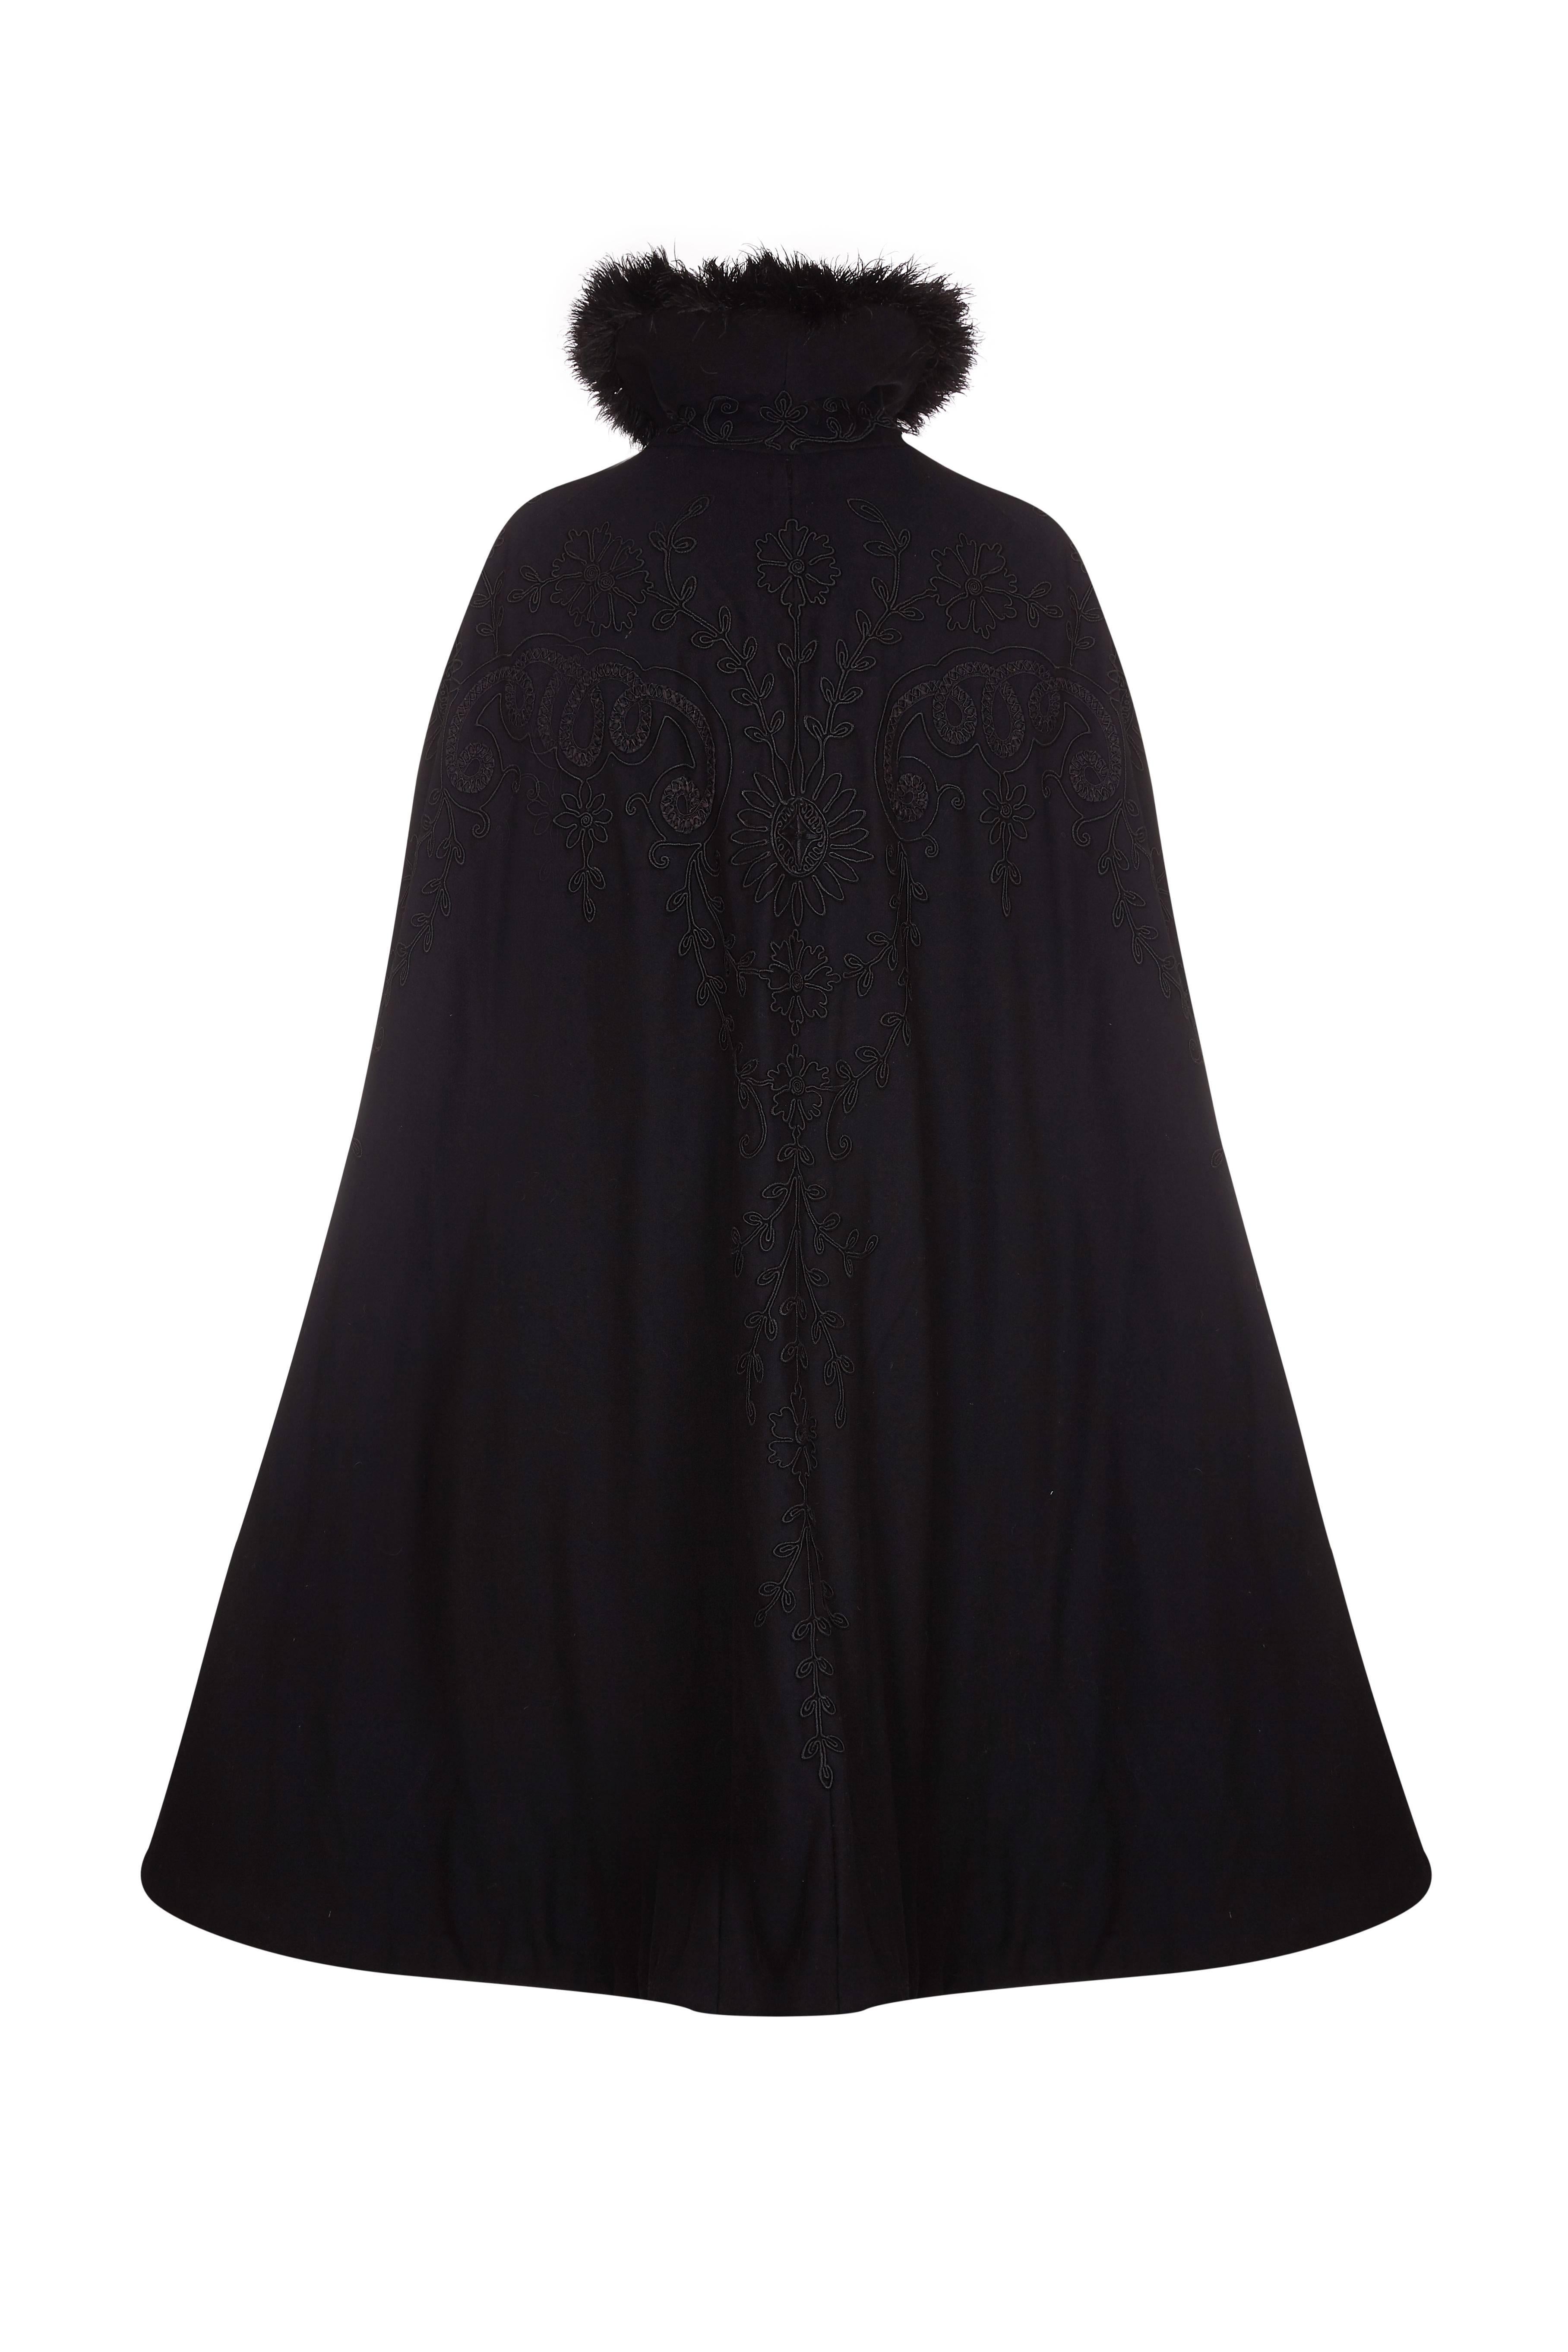 Lovely Victorian black wool cape with floral soutache work. It is shaped to fit around the shoulders, finishes at the knee and has buttons and loops to fasten at the front with hooks and eyes continuing to the hem.  Inside it is fully lined and